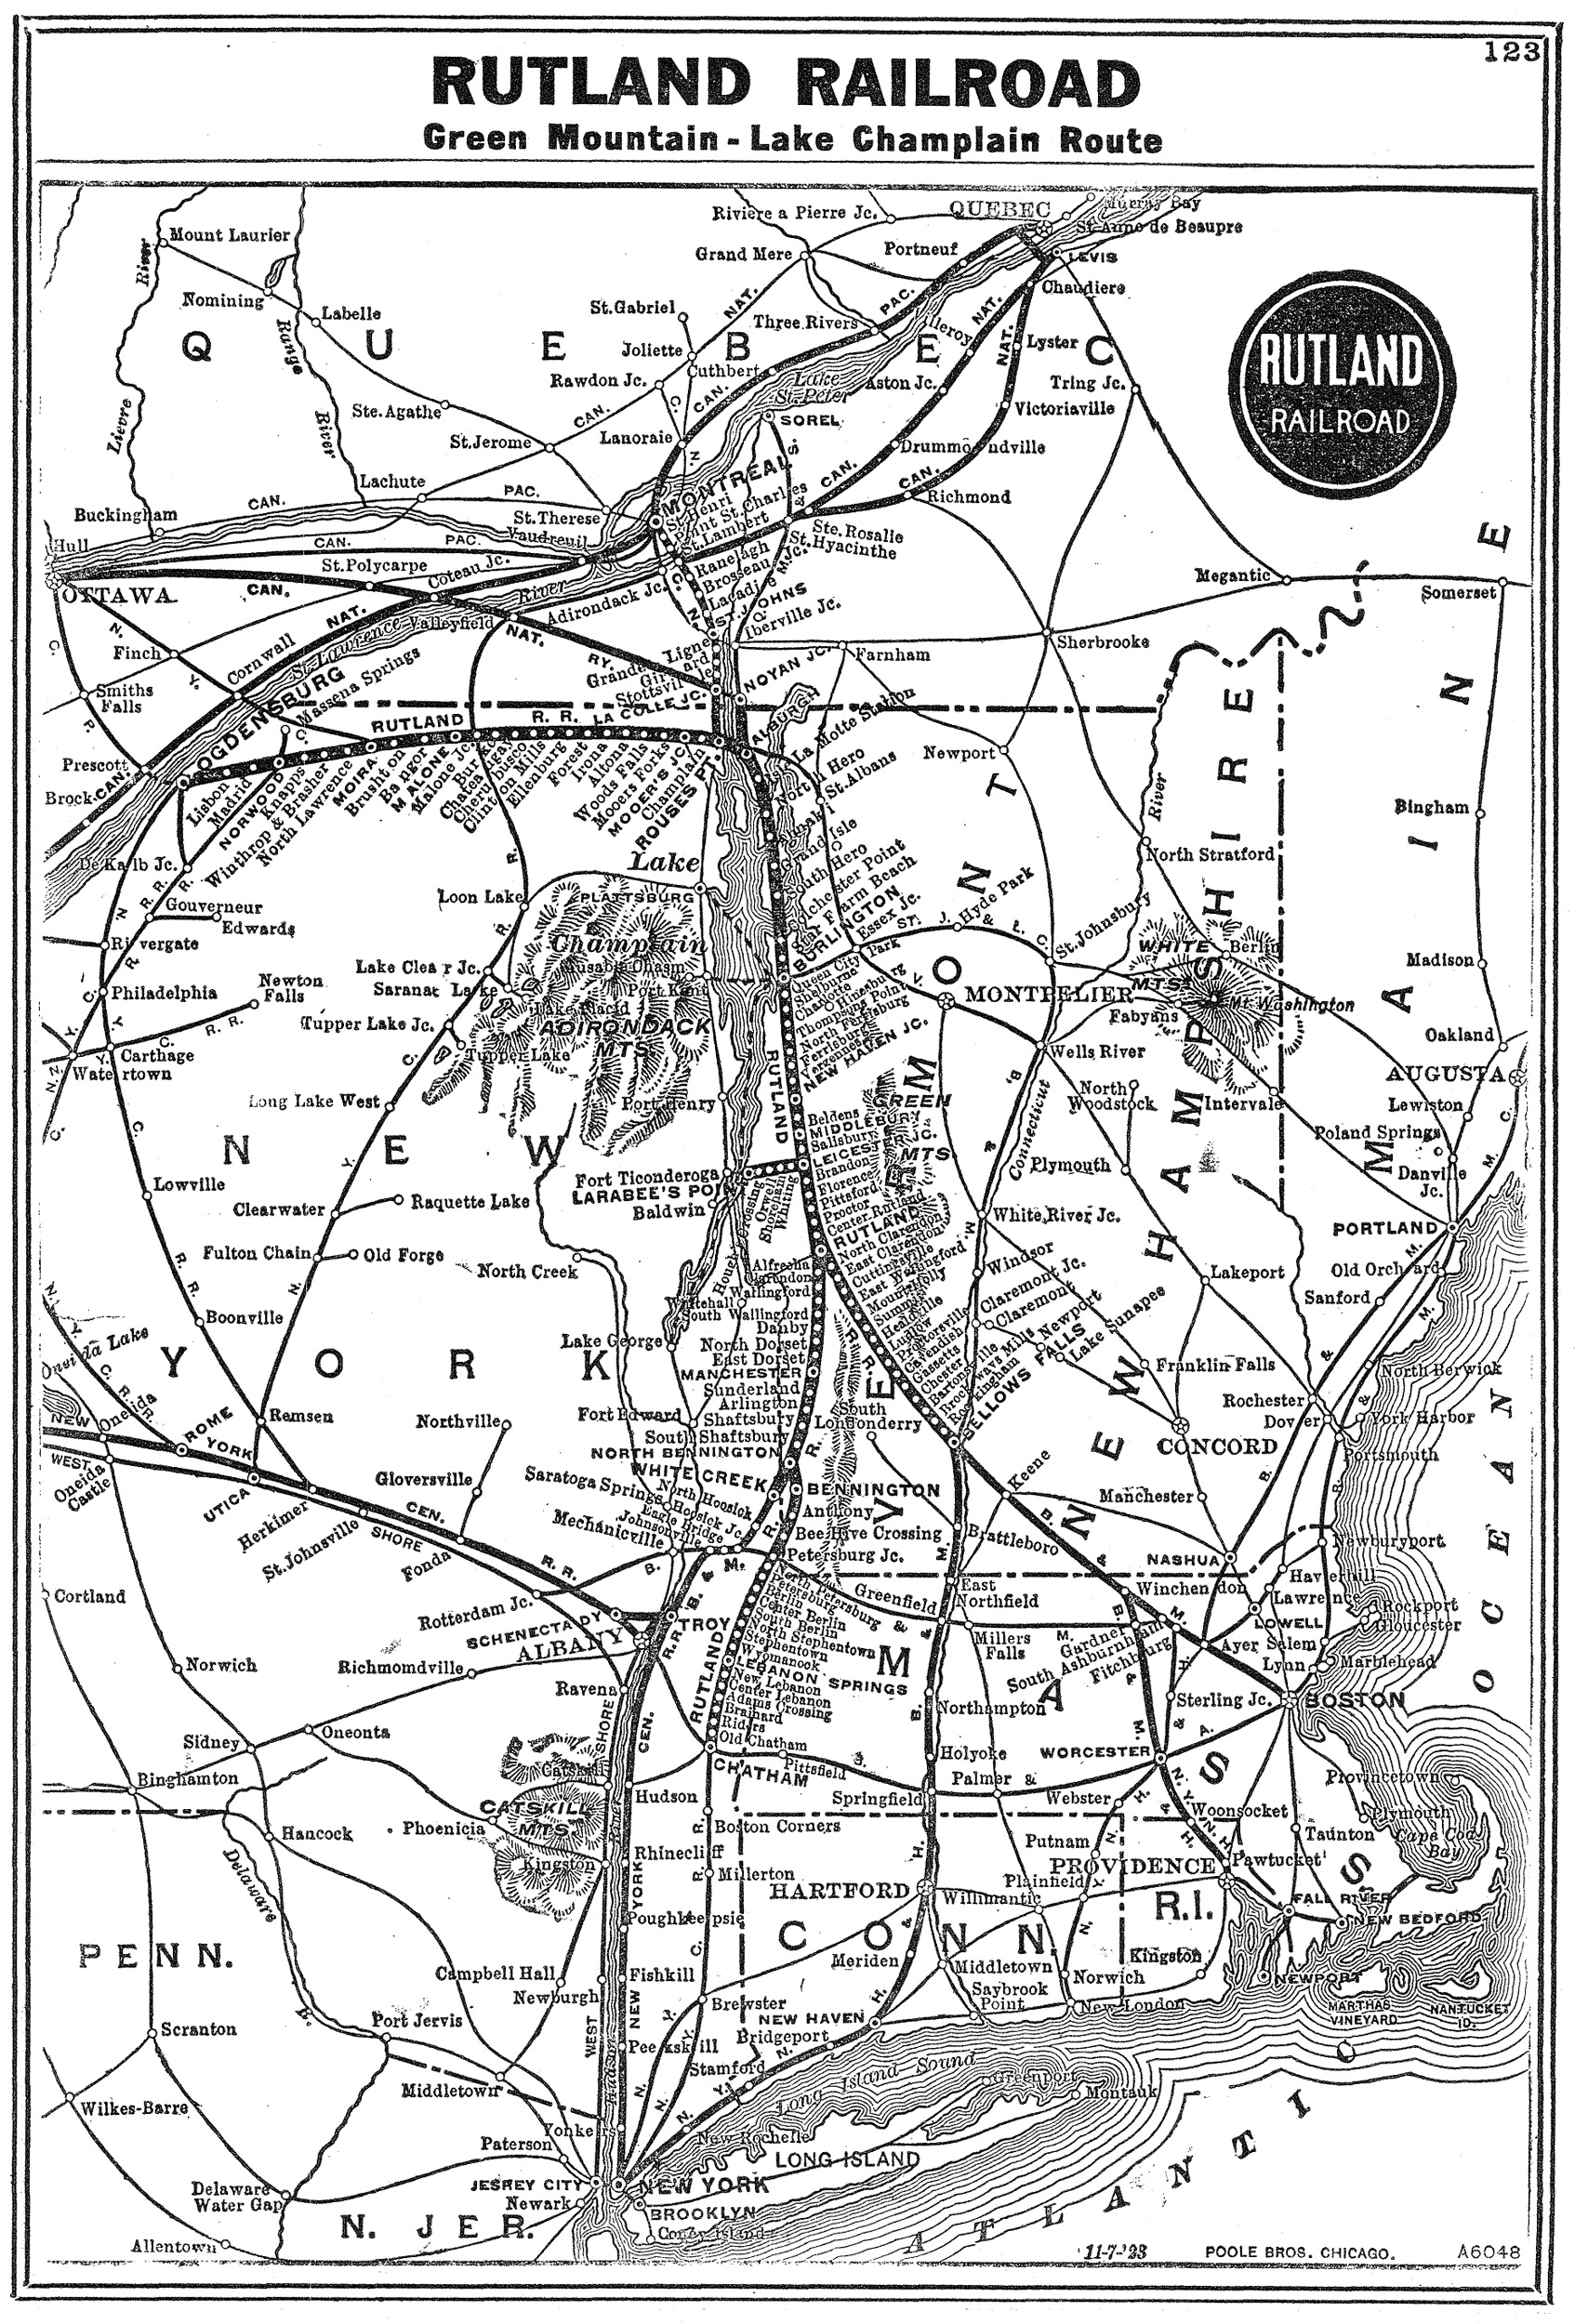 Rutland railroad map from the early 1900s